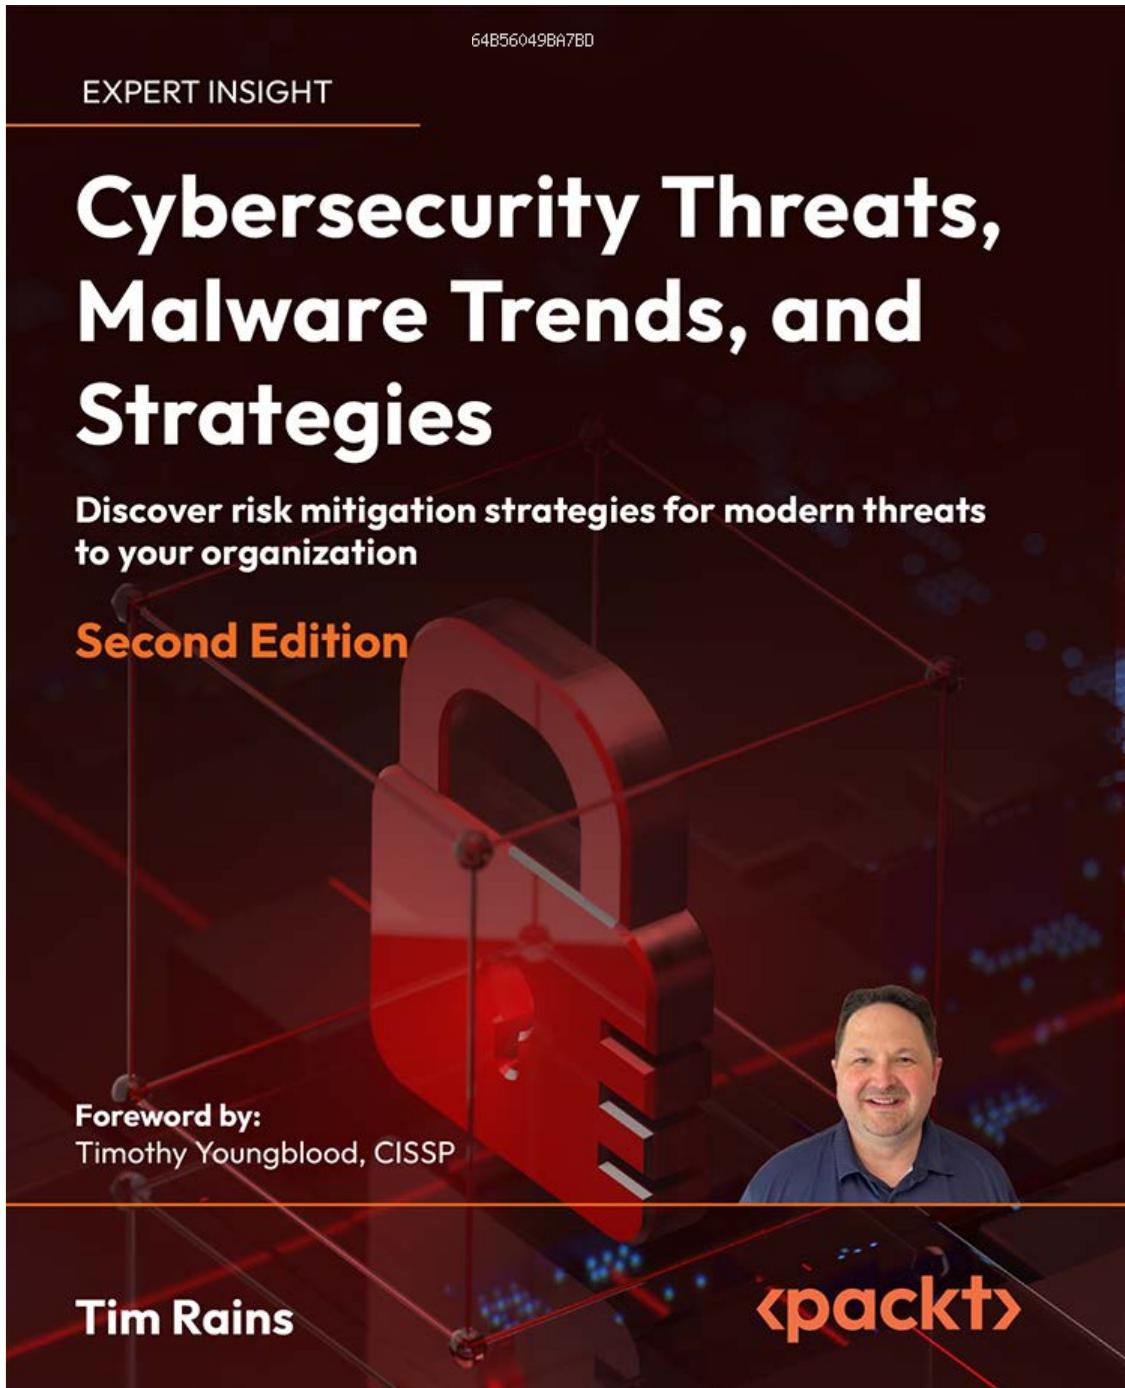 Cybersecurity Threats, Malware Trends, and Strategies: Discover Risk Mitigation Strategies for Modern Threats to Your Organization